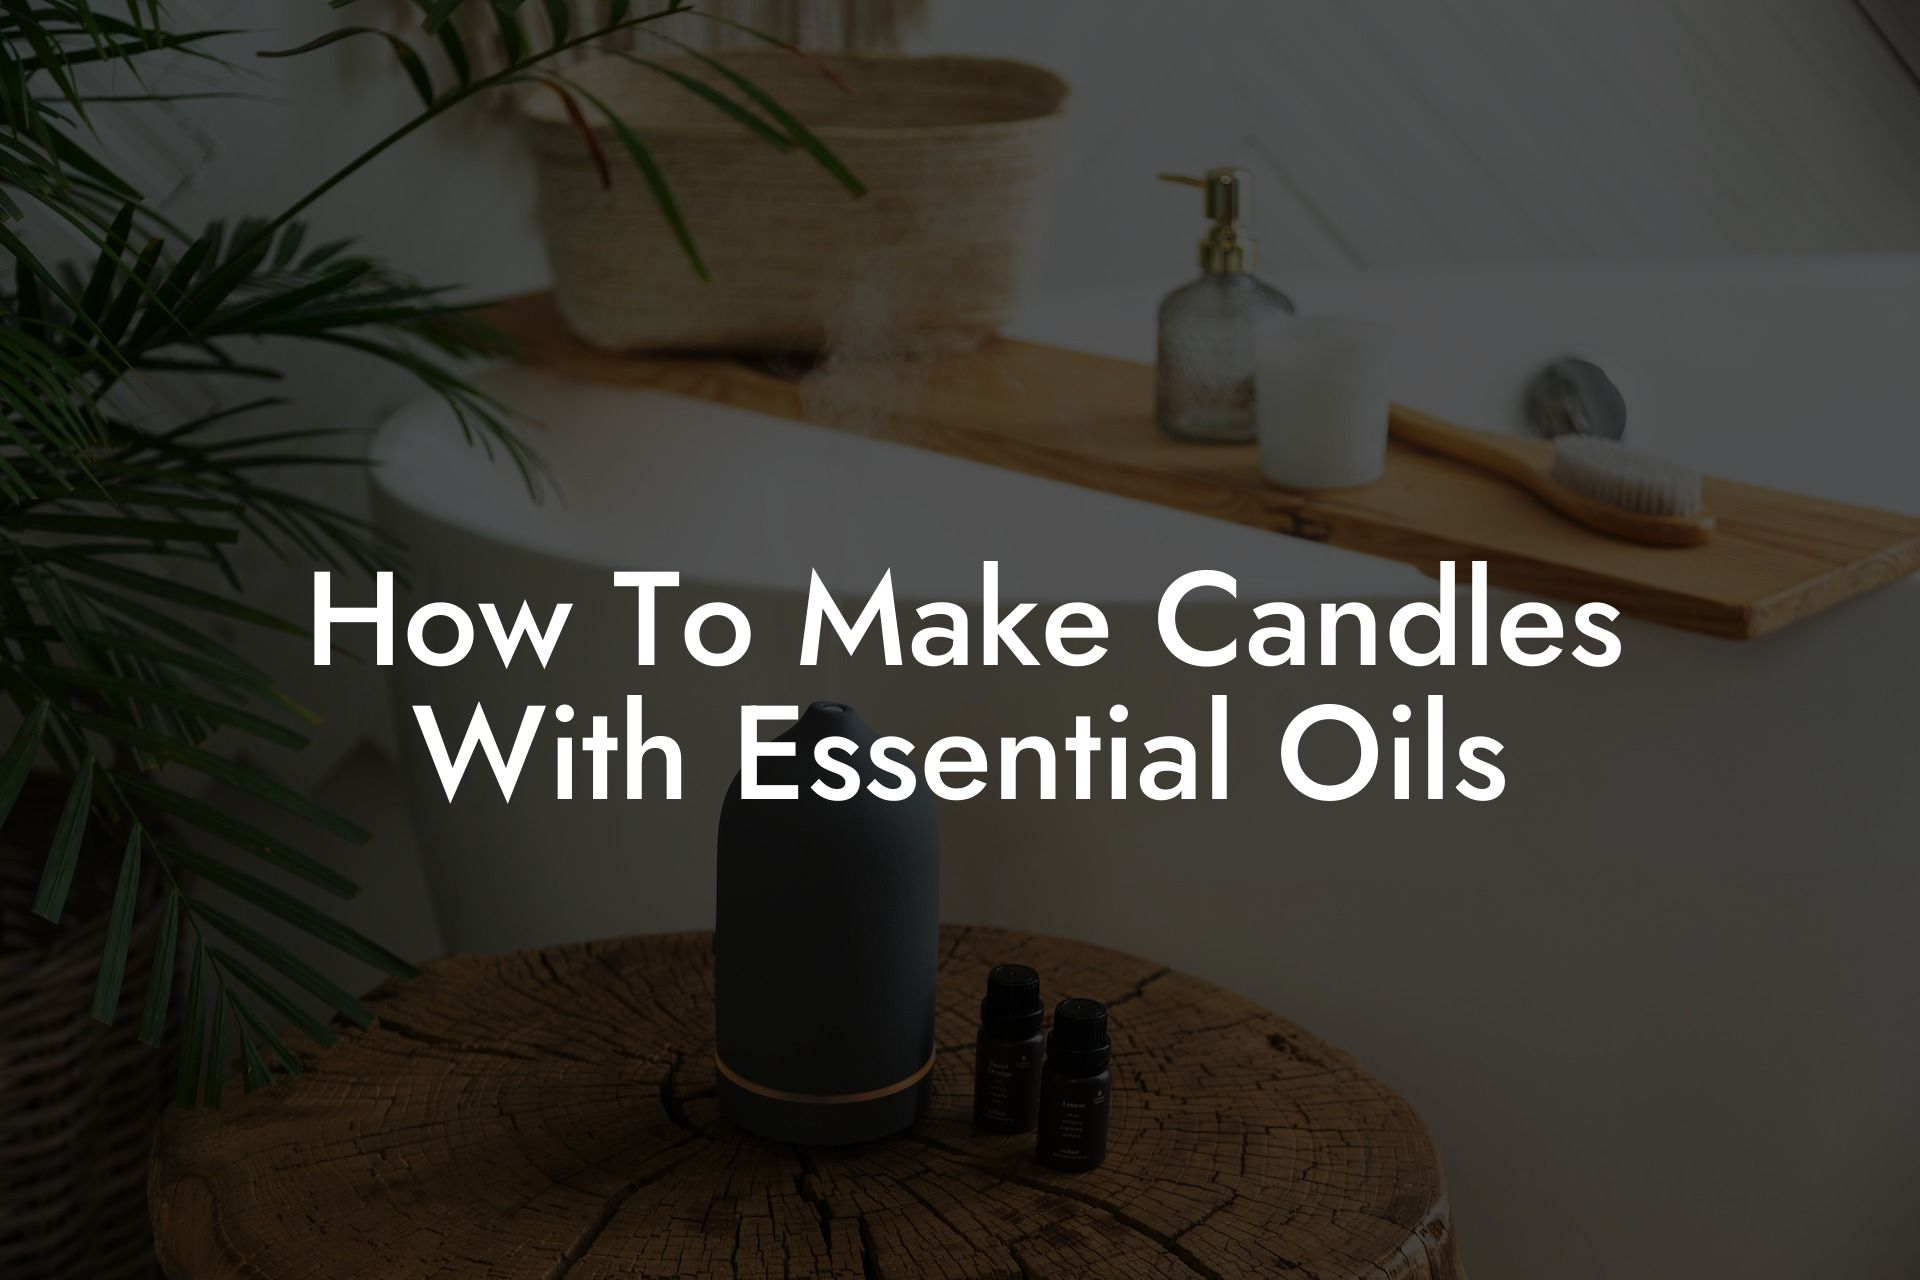 How To Make Candles With Essential Oils